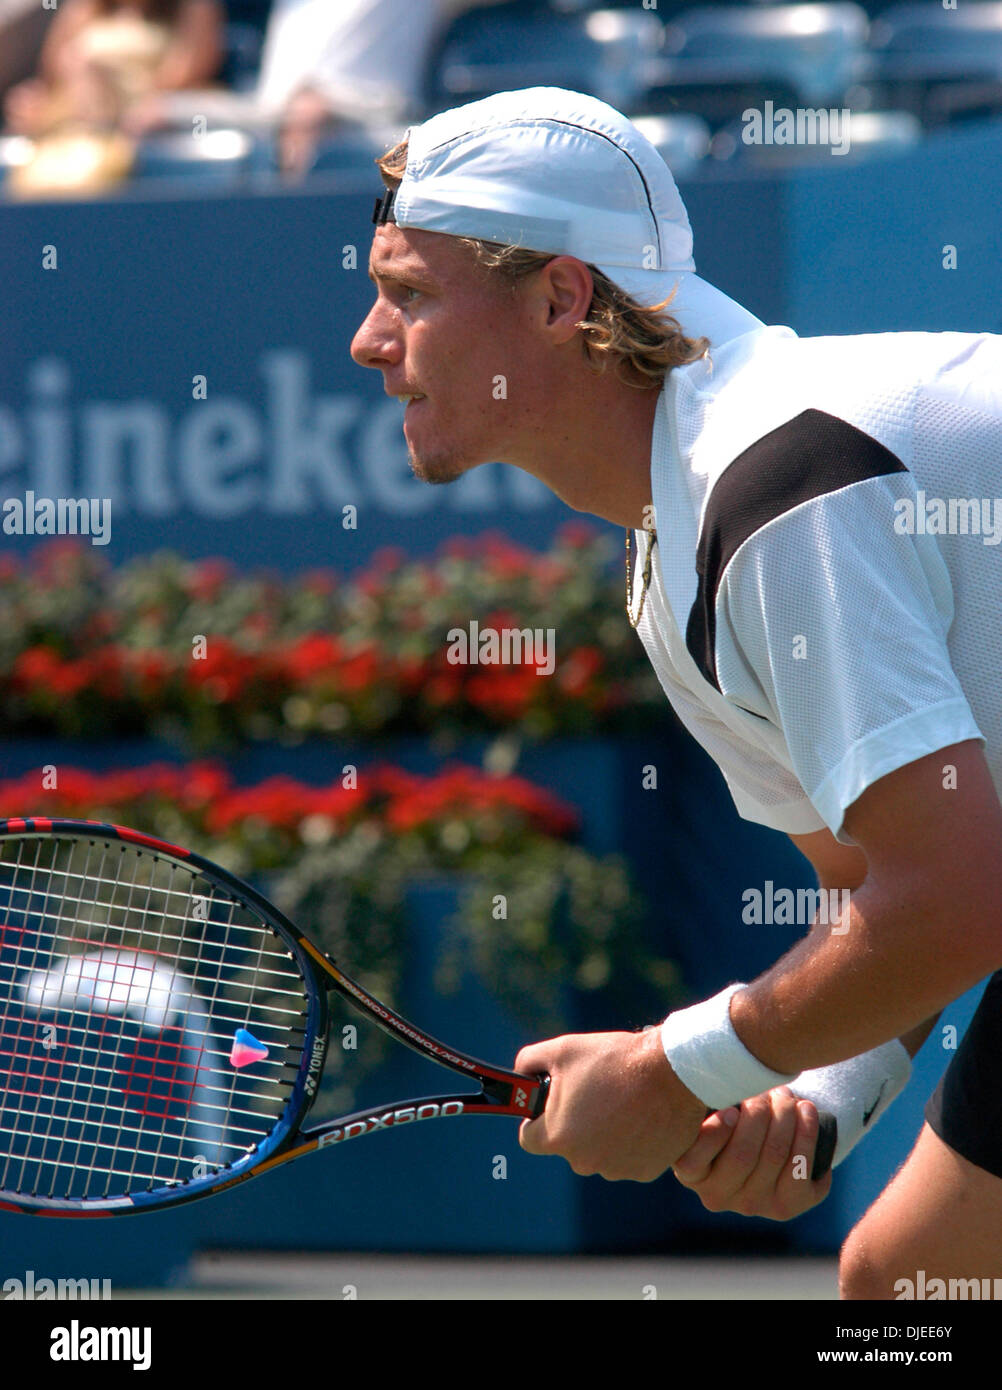 Sep 01, 2004; Flushing Meadows, NY, USA; Tennis player LLEYTON HEWITT (4)  of Australia defeated Wayne Ferreira of Russia during the first round at  the 2004 US Open Tennis Championships Stock Photo - Alamy